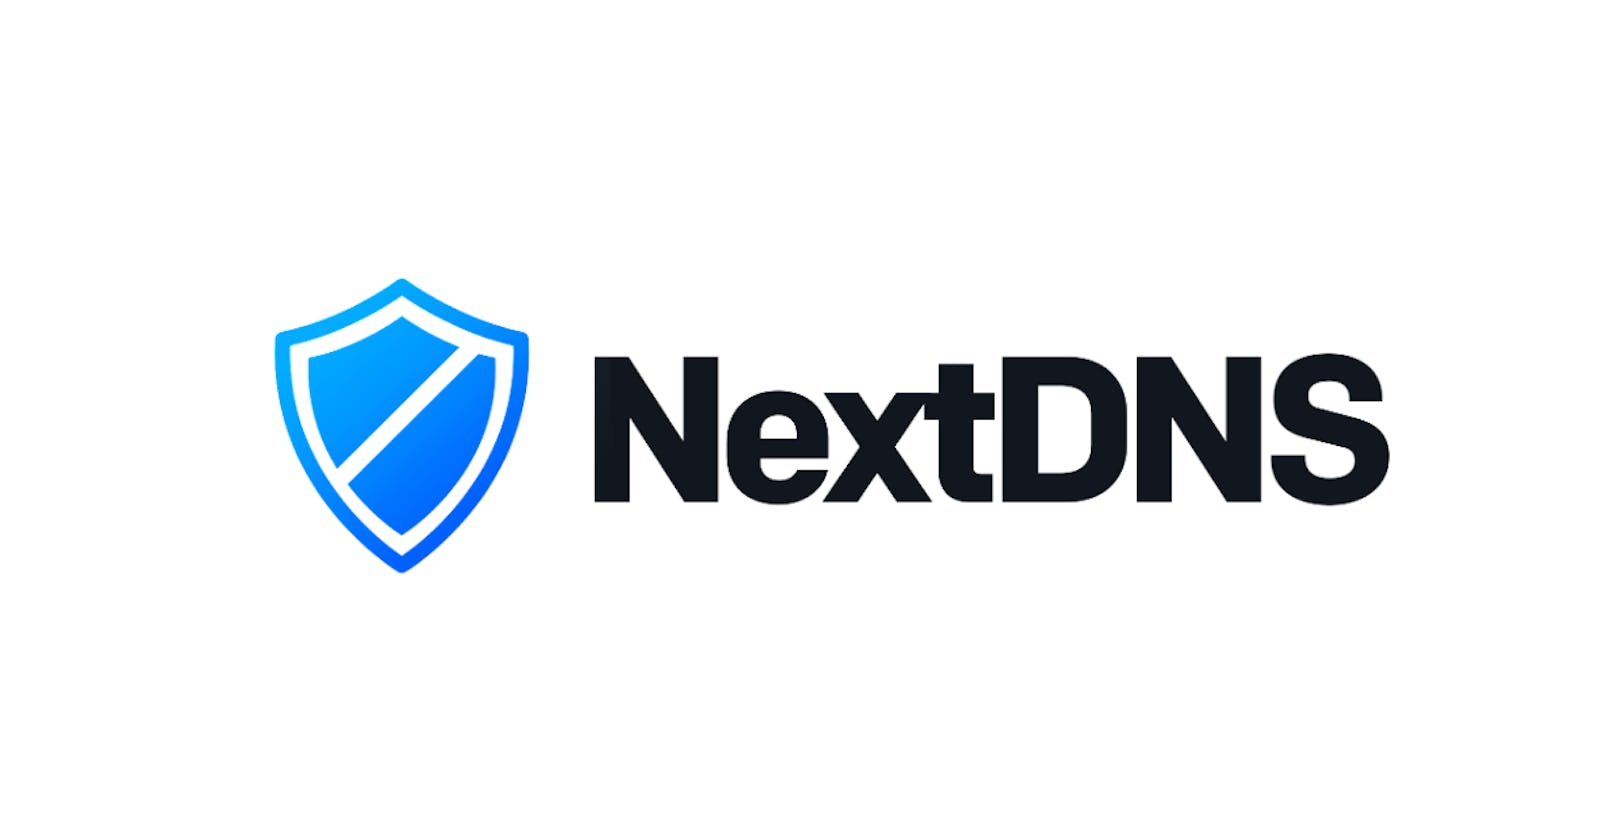 NextDNS: The Future of Internet Security and Privacy